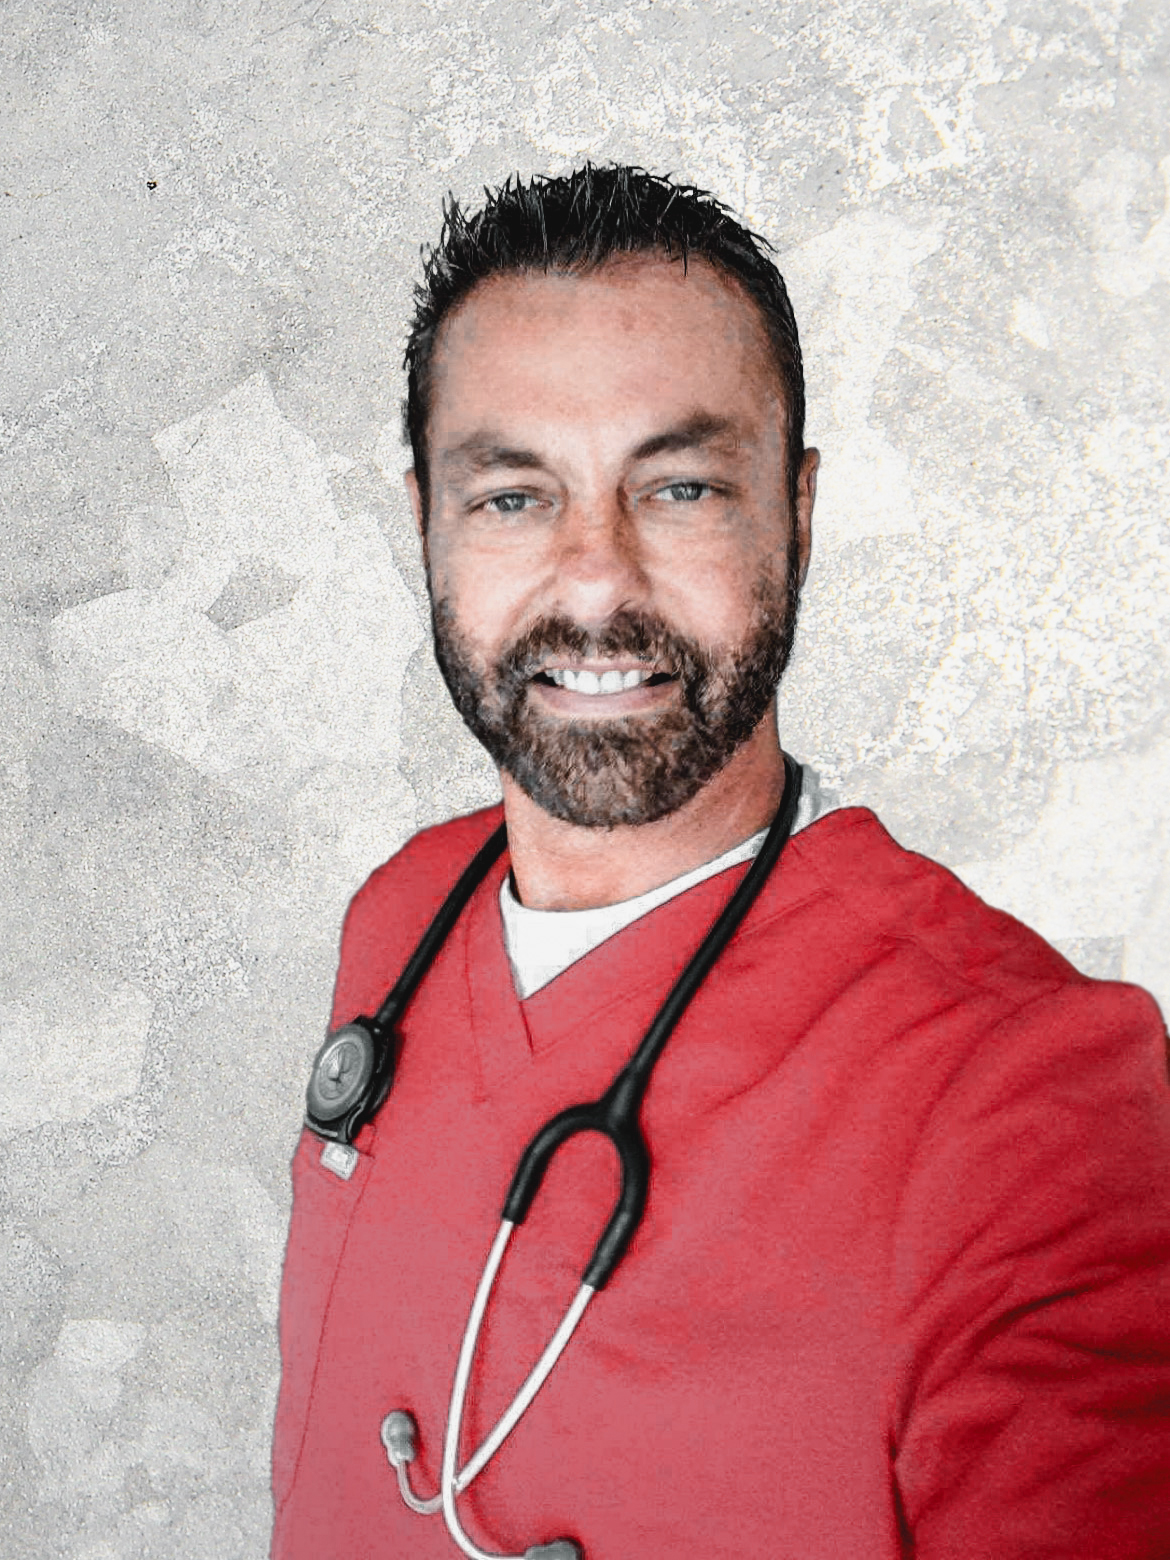 A healthcare professional wearing a red scrub suit